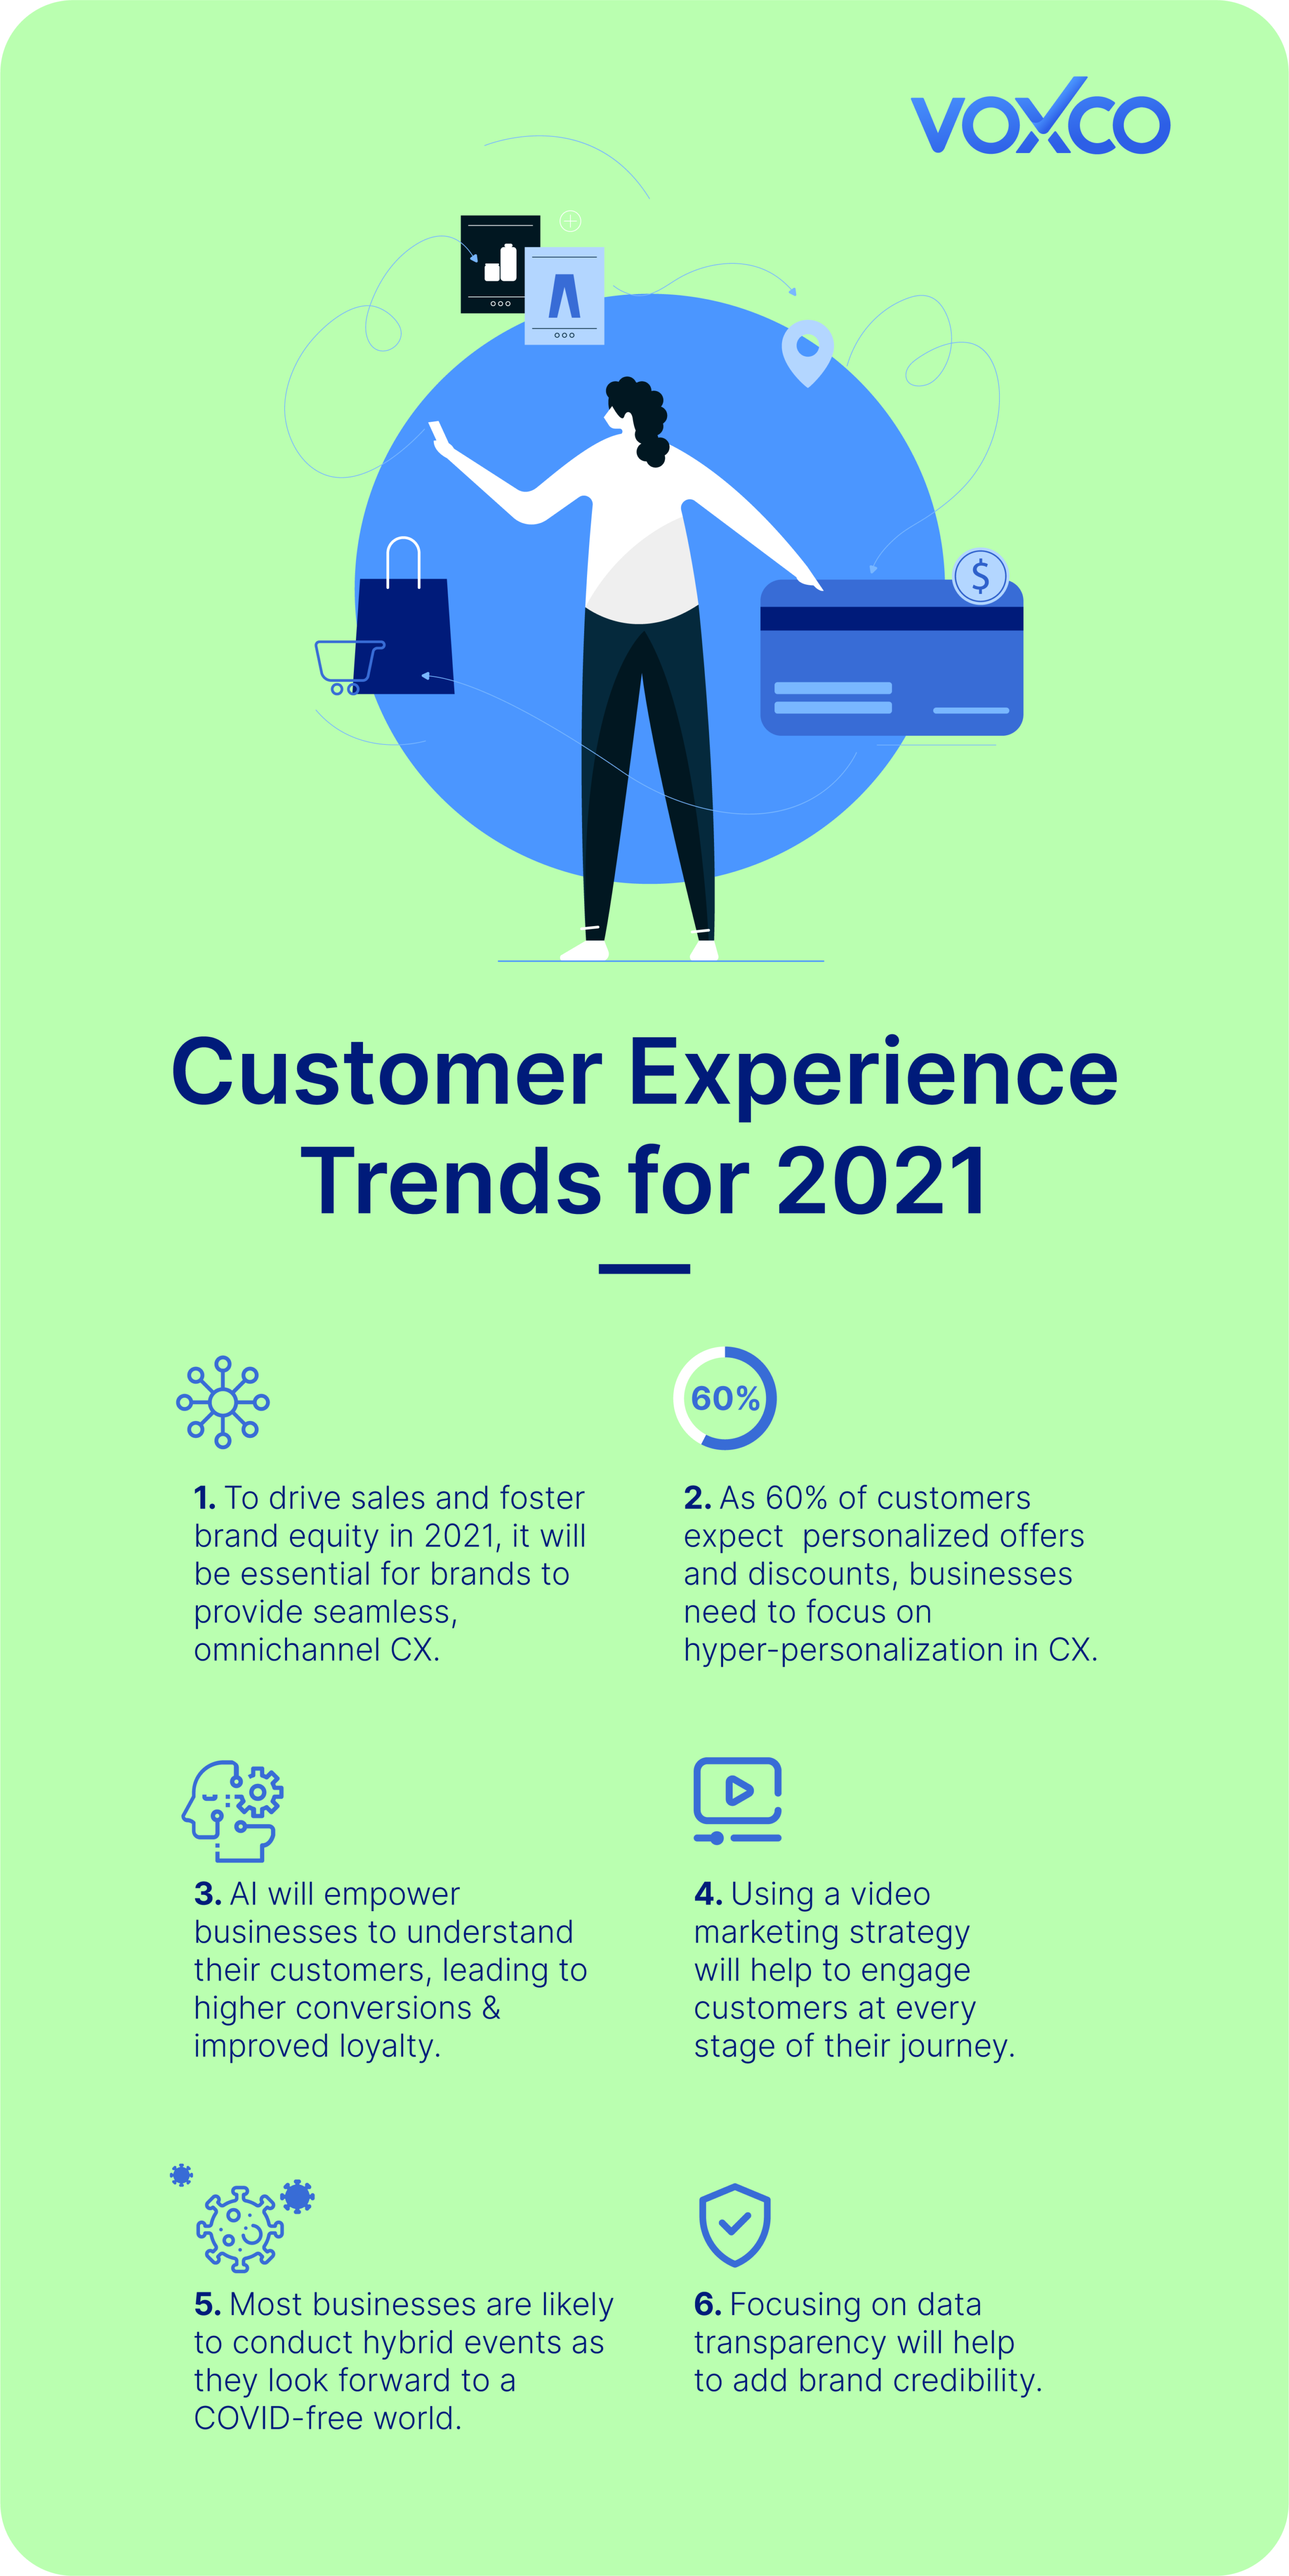 Customer Experience Trends to Watch out For in 2021 05 1 1 2 1